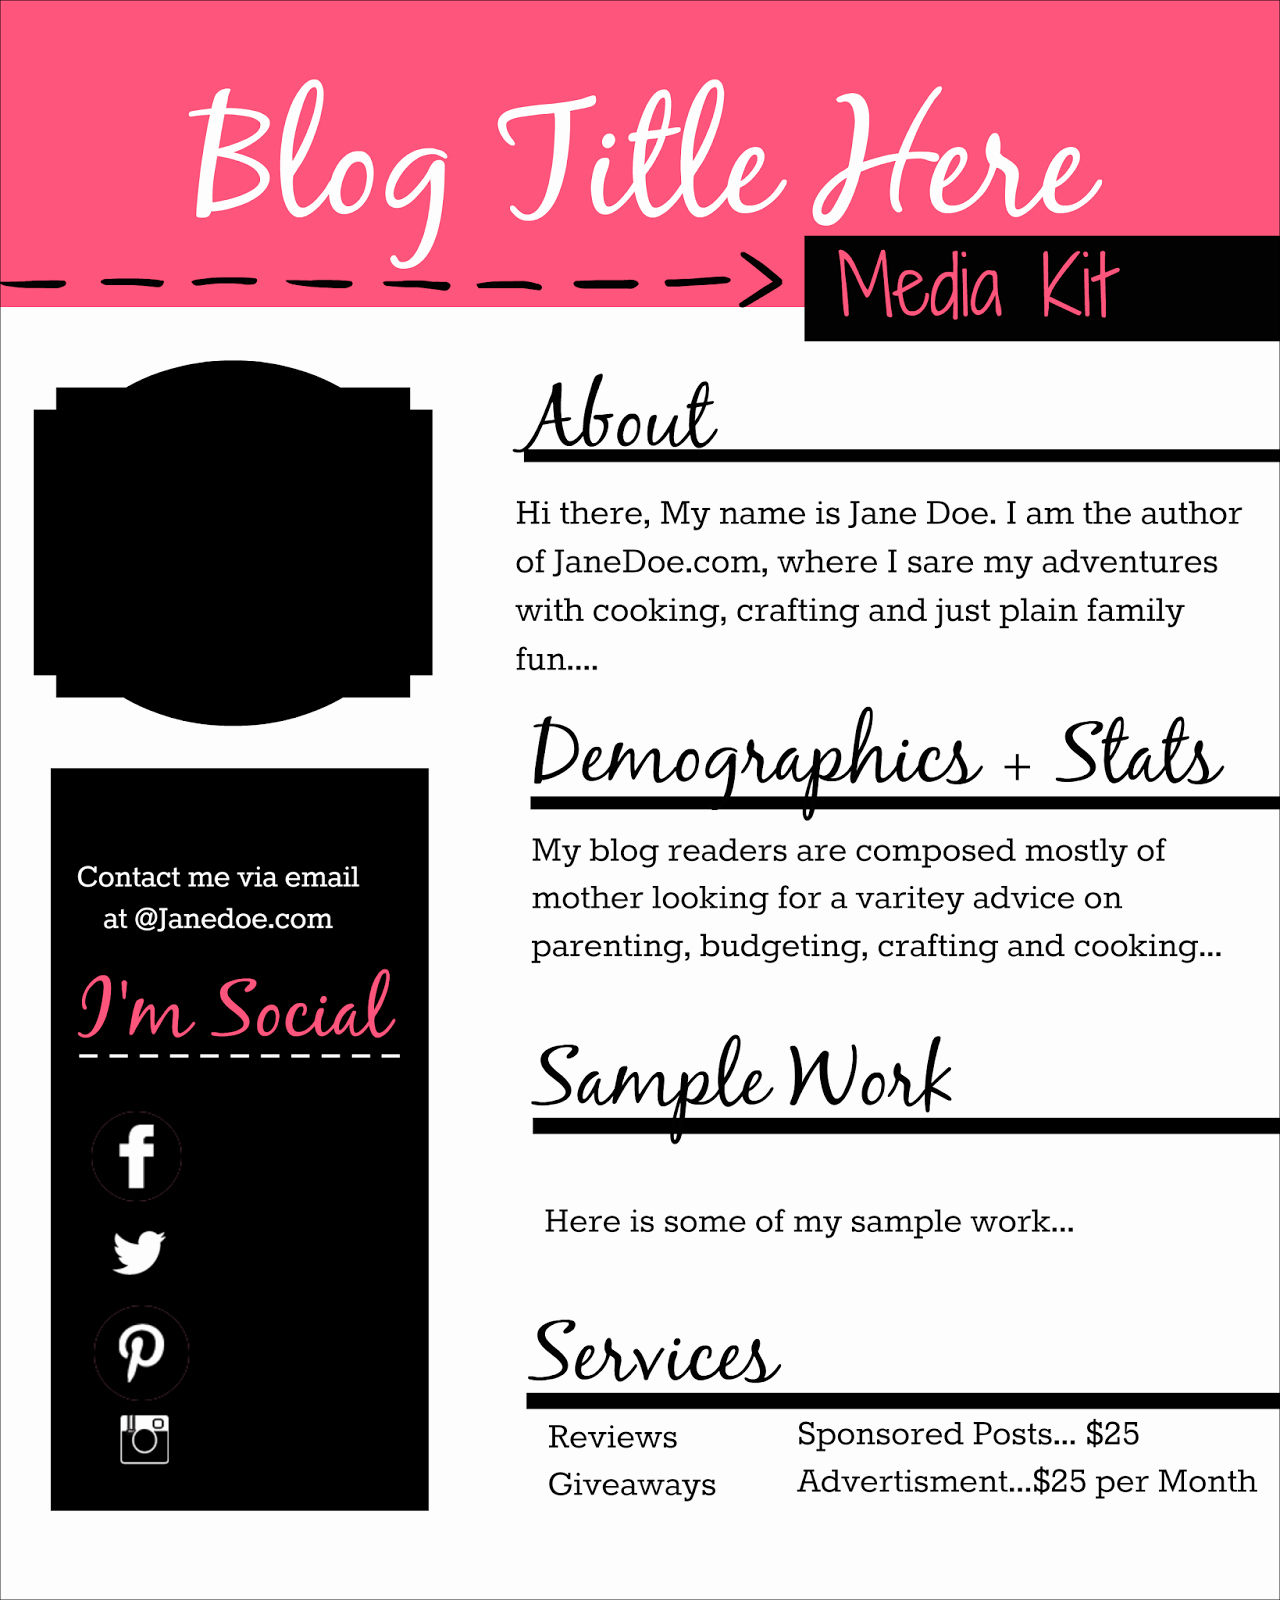 Free Press Kit Template Best Of How to Design A Free Media Kit for Your Blog Premade